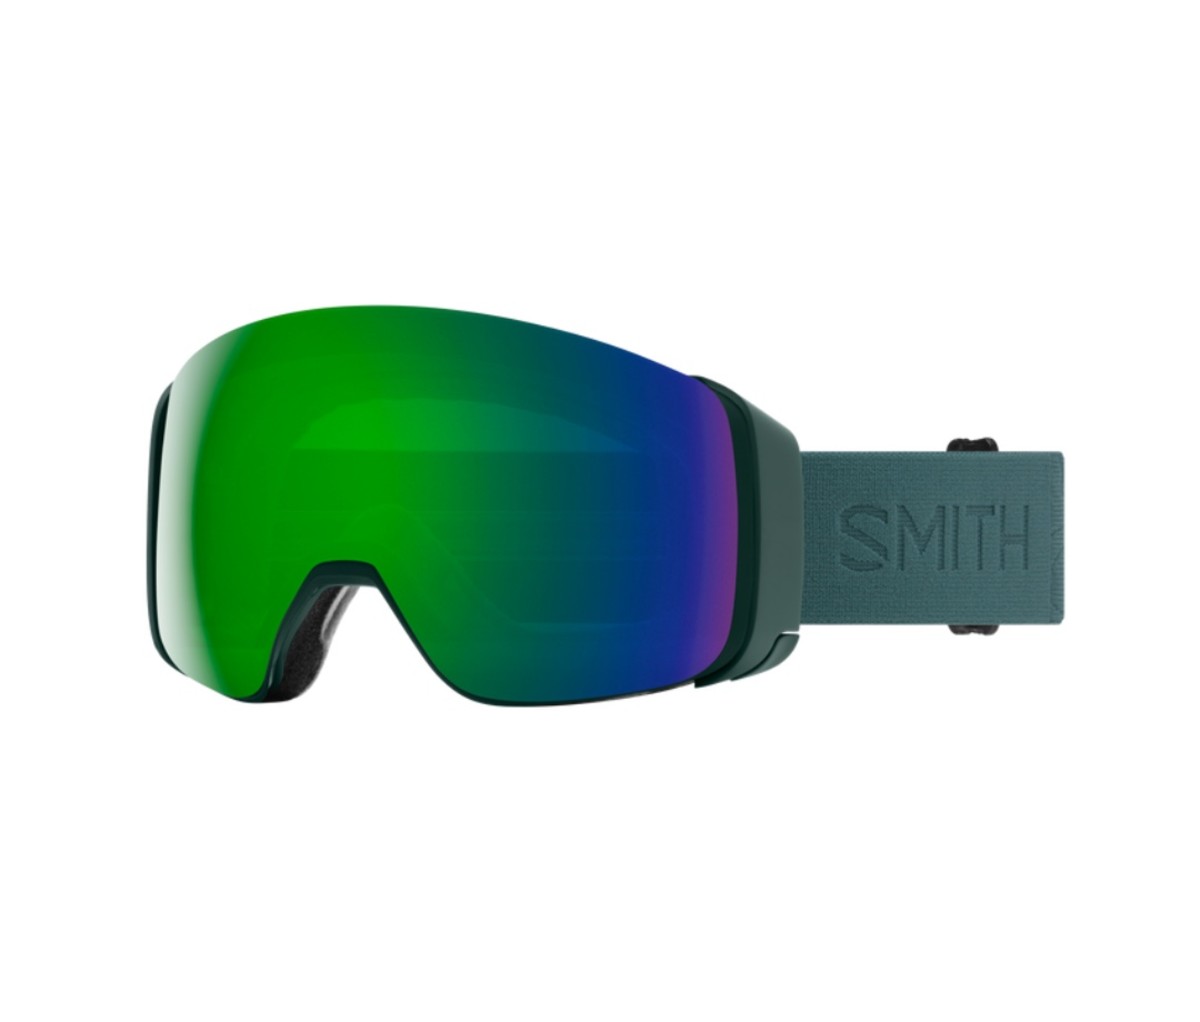 Smith 4D goggles